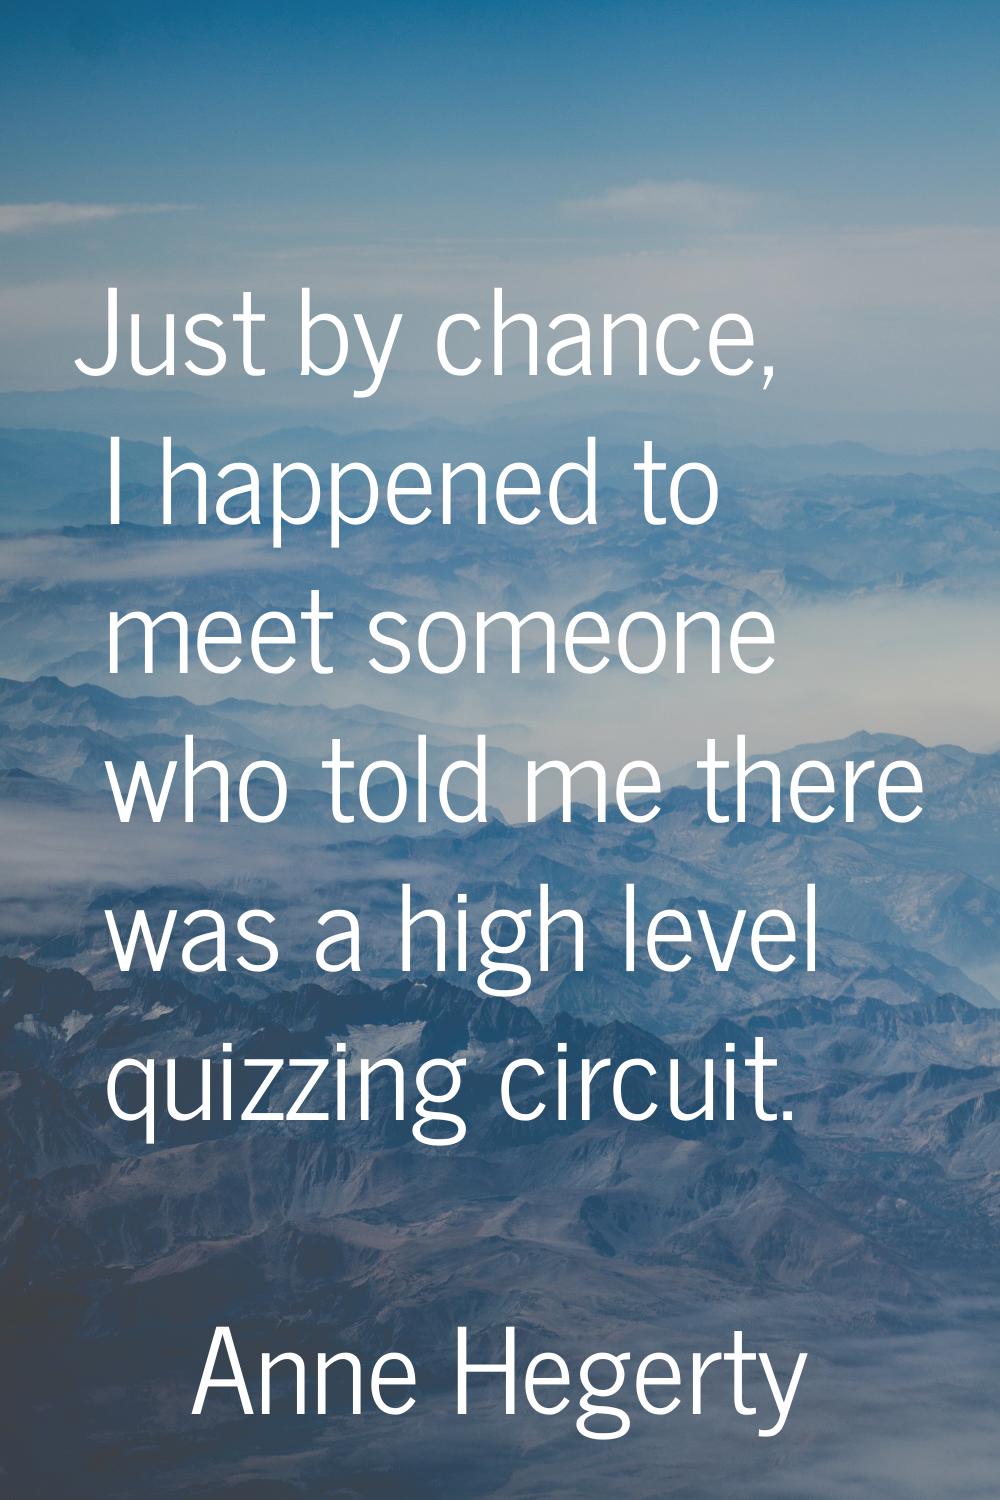 Just by chance, I happened to meet someone who told me there was a high level quizzing circuit.